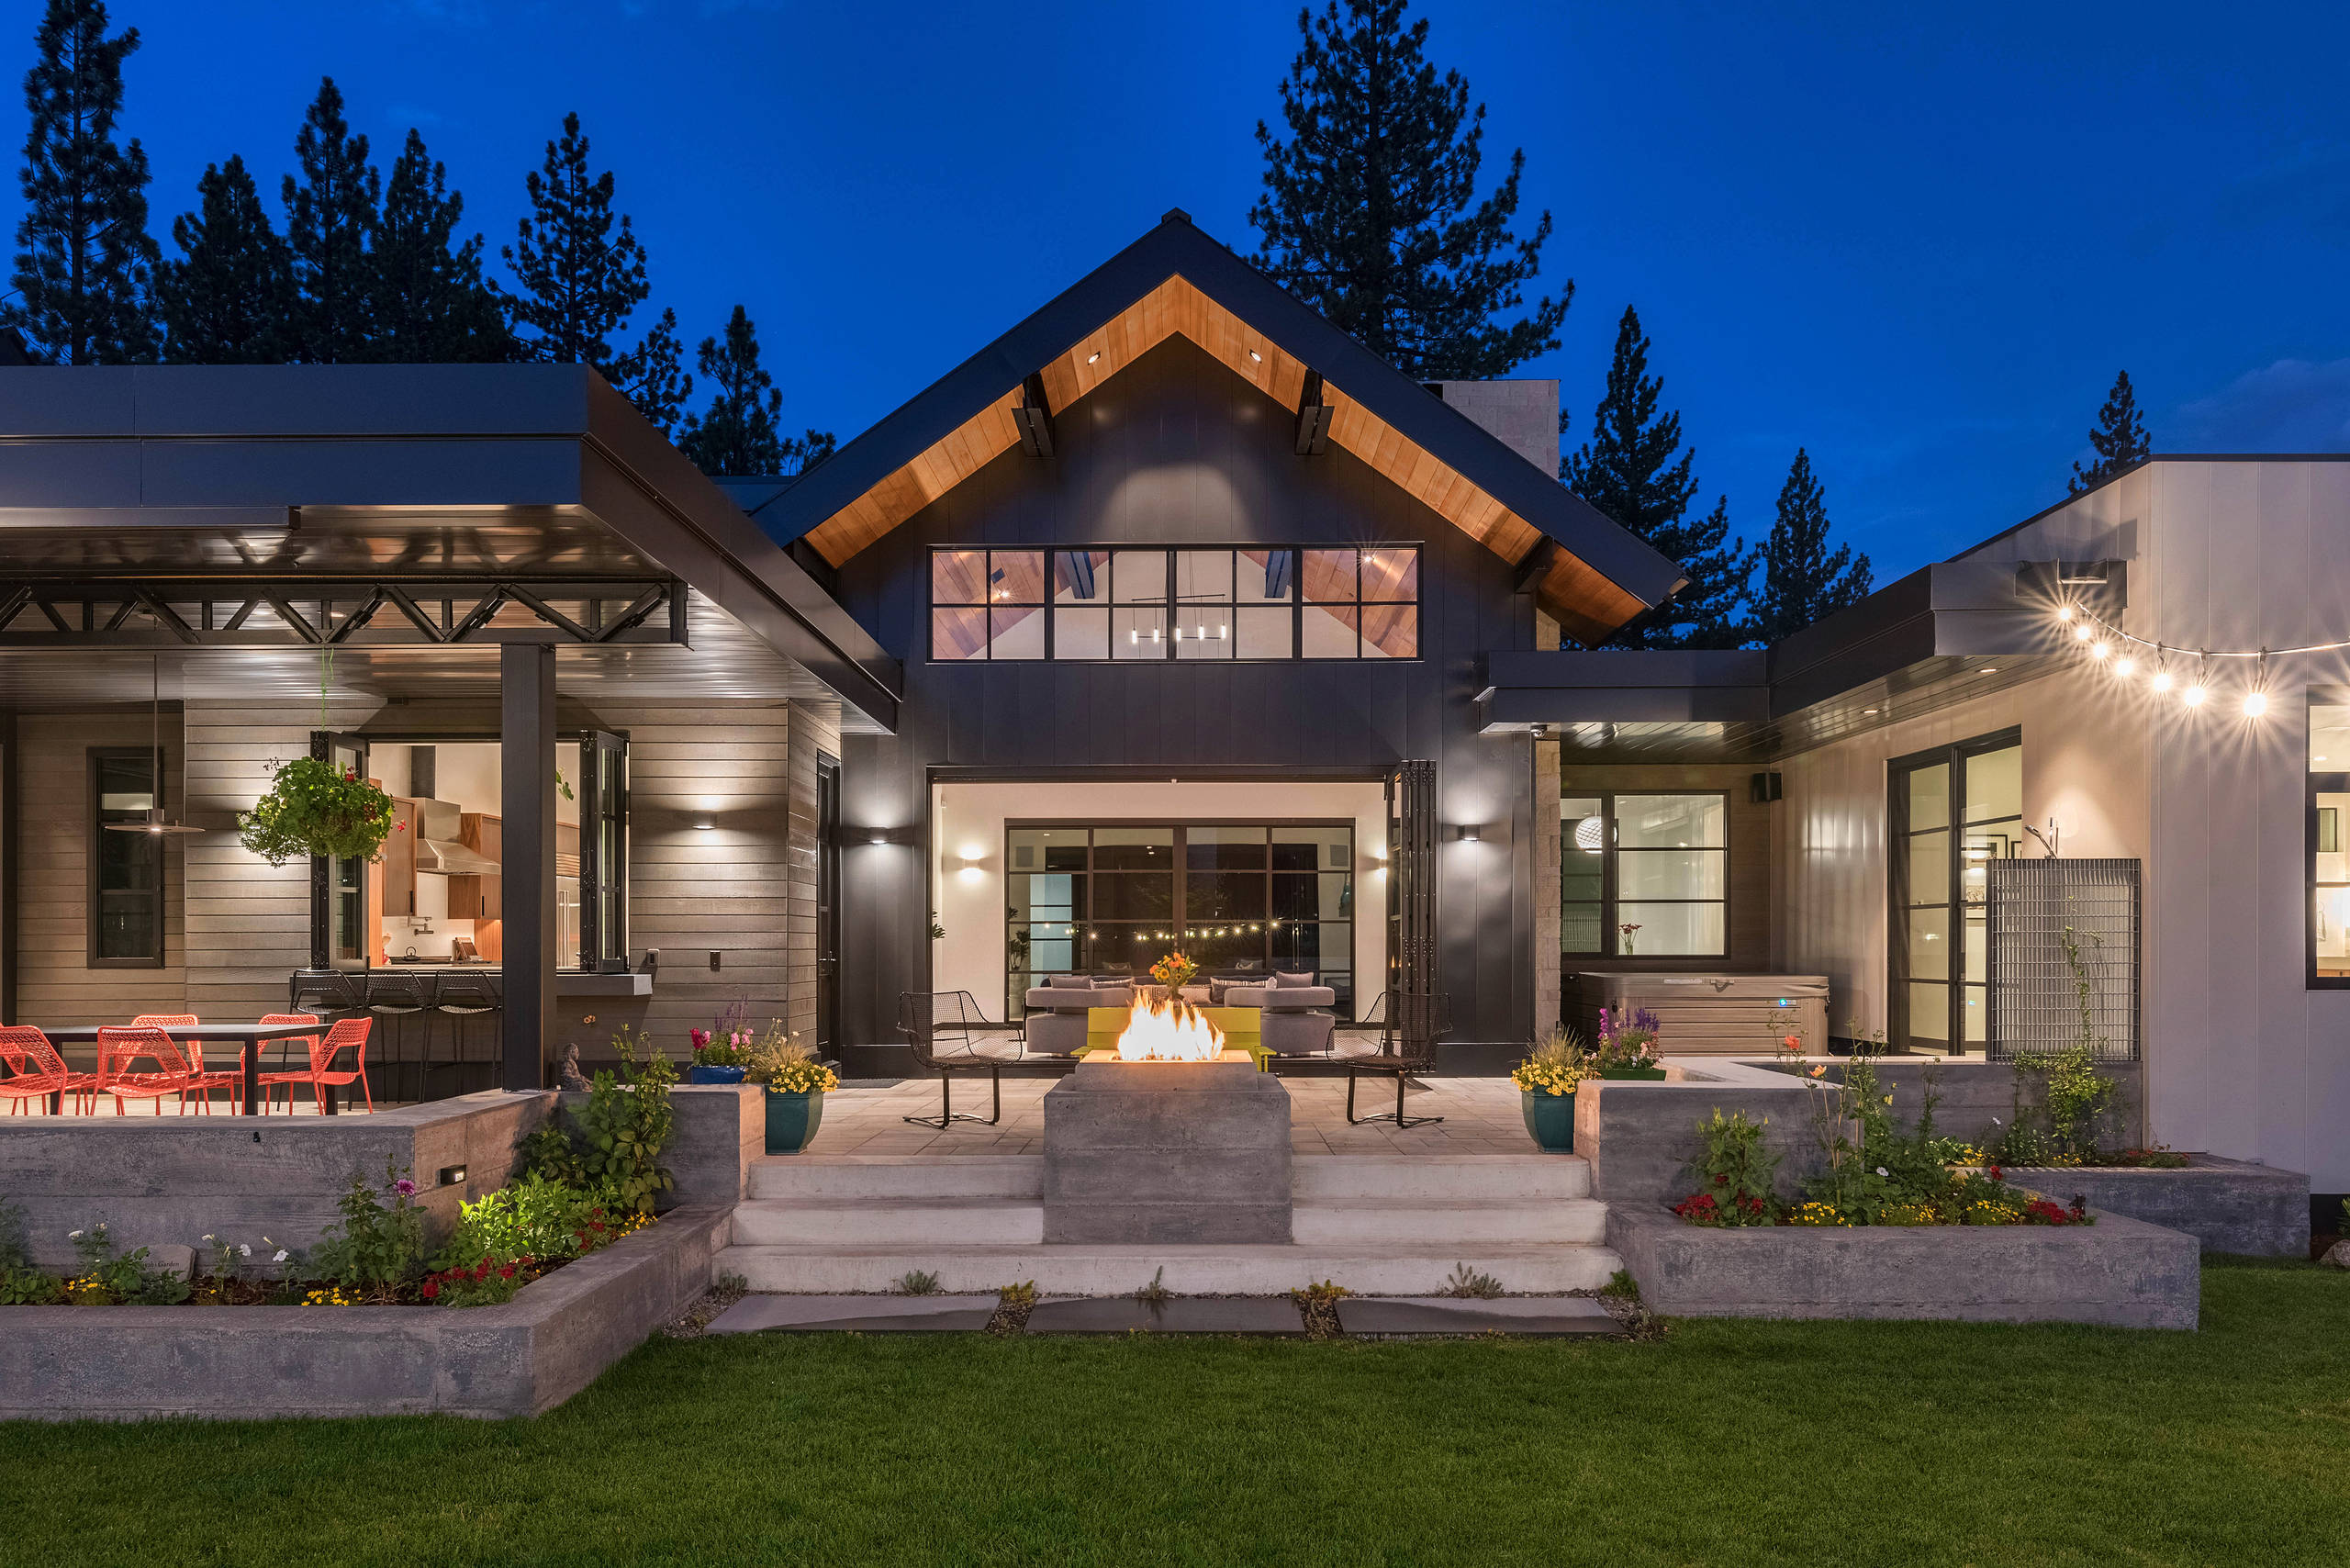 75 Modern Exterior Home Ideas You'Ll Love - May, 2023 | Houzz